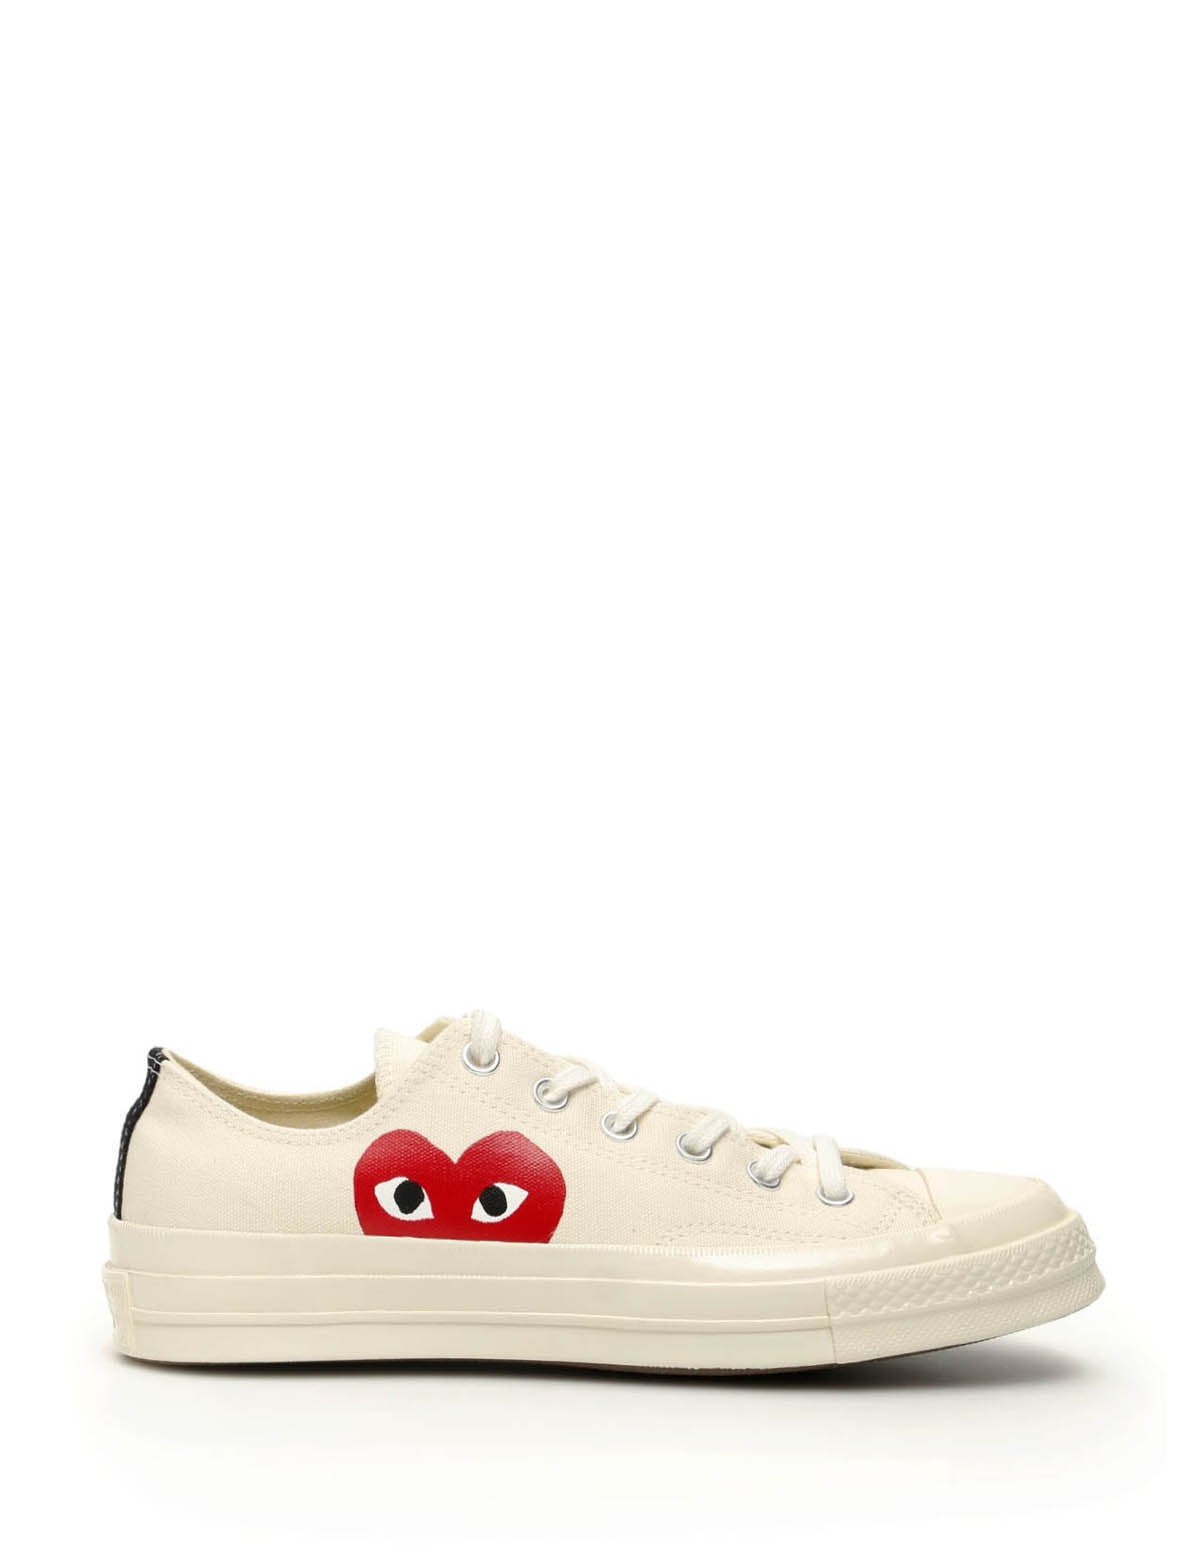 comme-des-garcons-play-chuck-70-low-top-sneakers-comme-des-garcons-play-x-converse.jpg